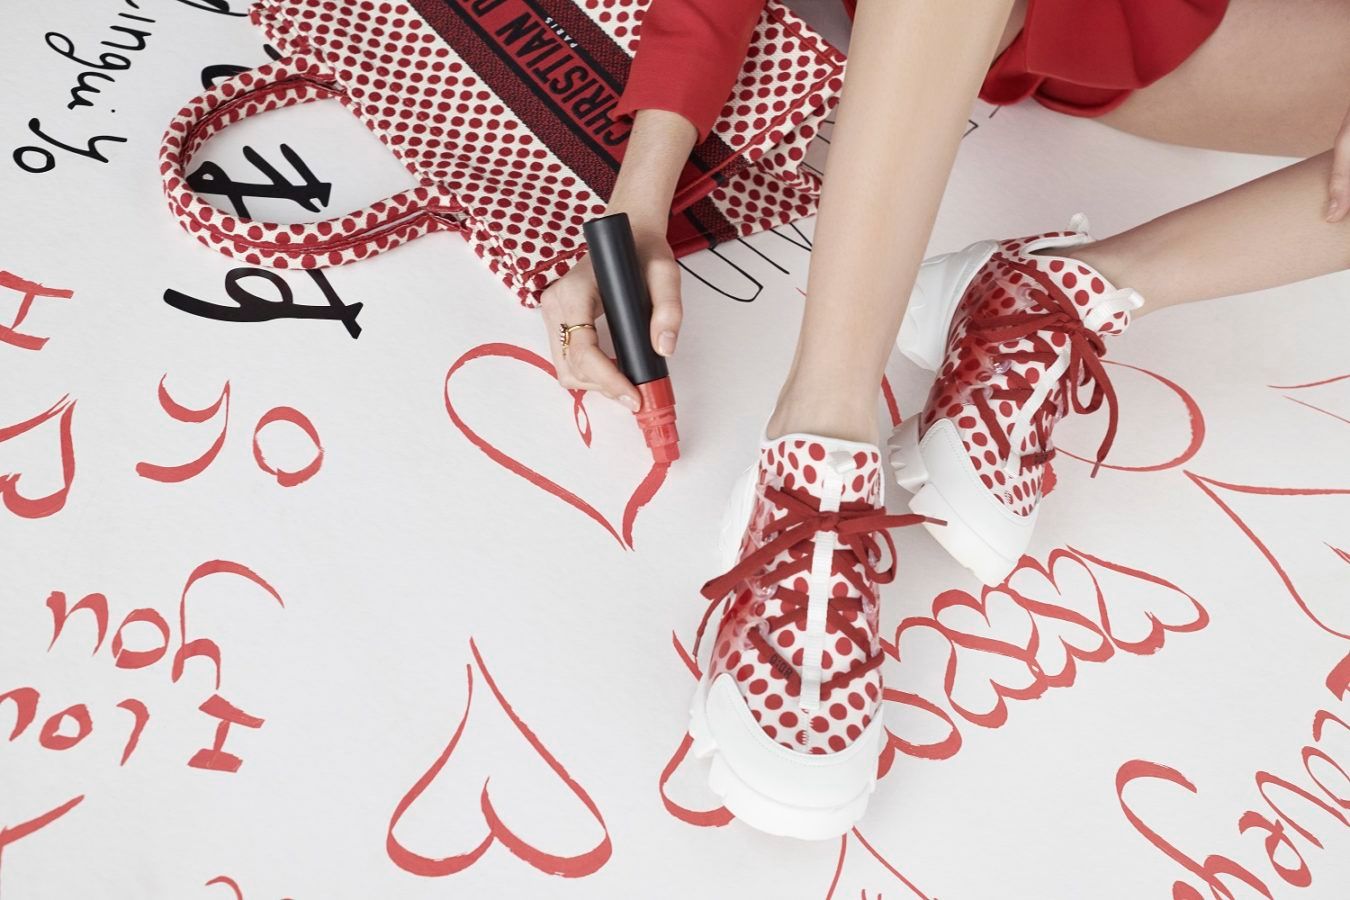 Love letter from Dior: Dioramour, a new capsule collection